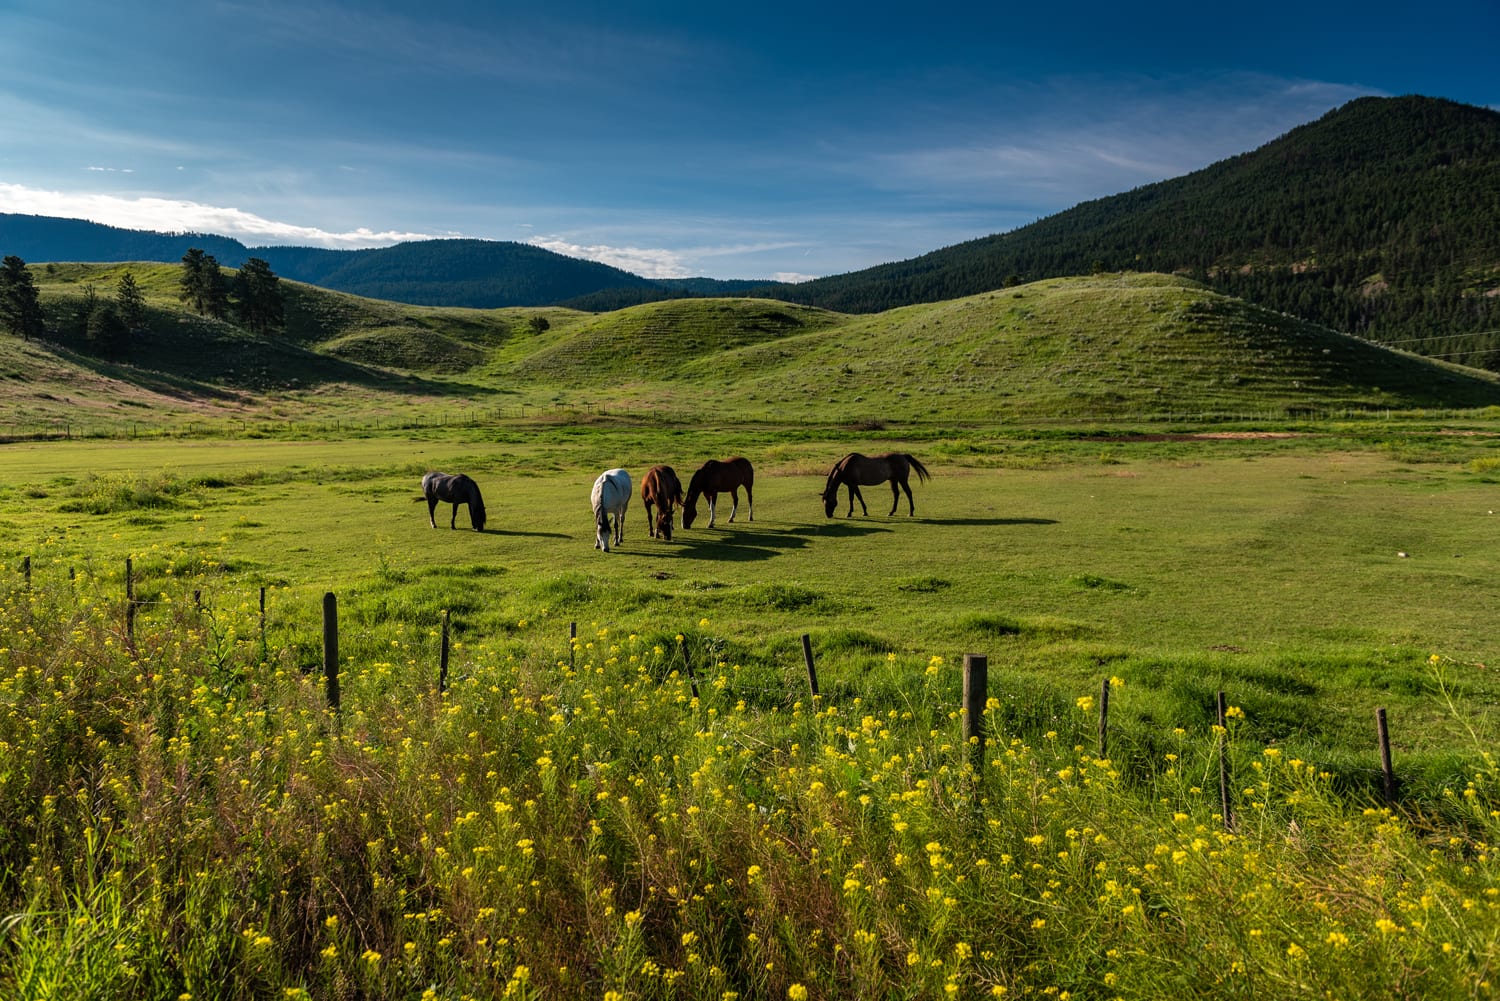 Kamloops rural life with horses in a grassy field with hills and mountains and wildflowers